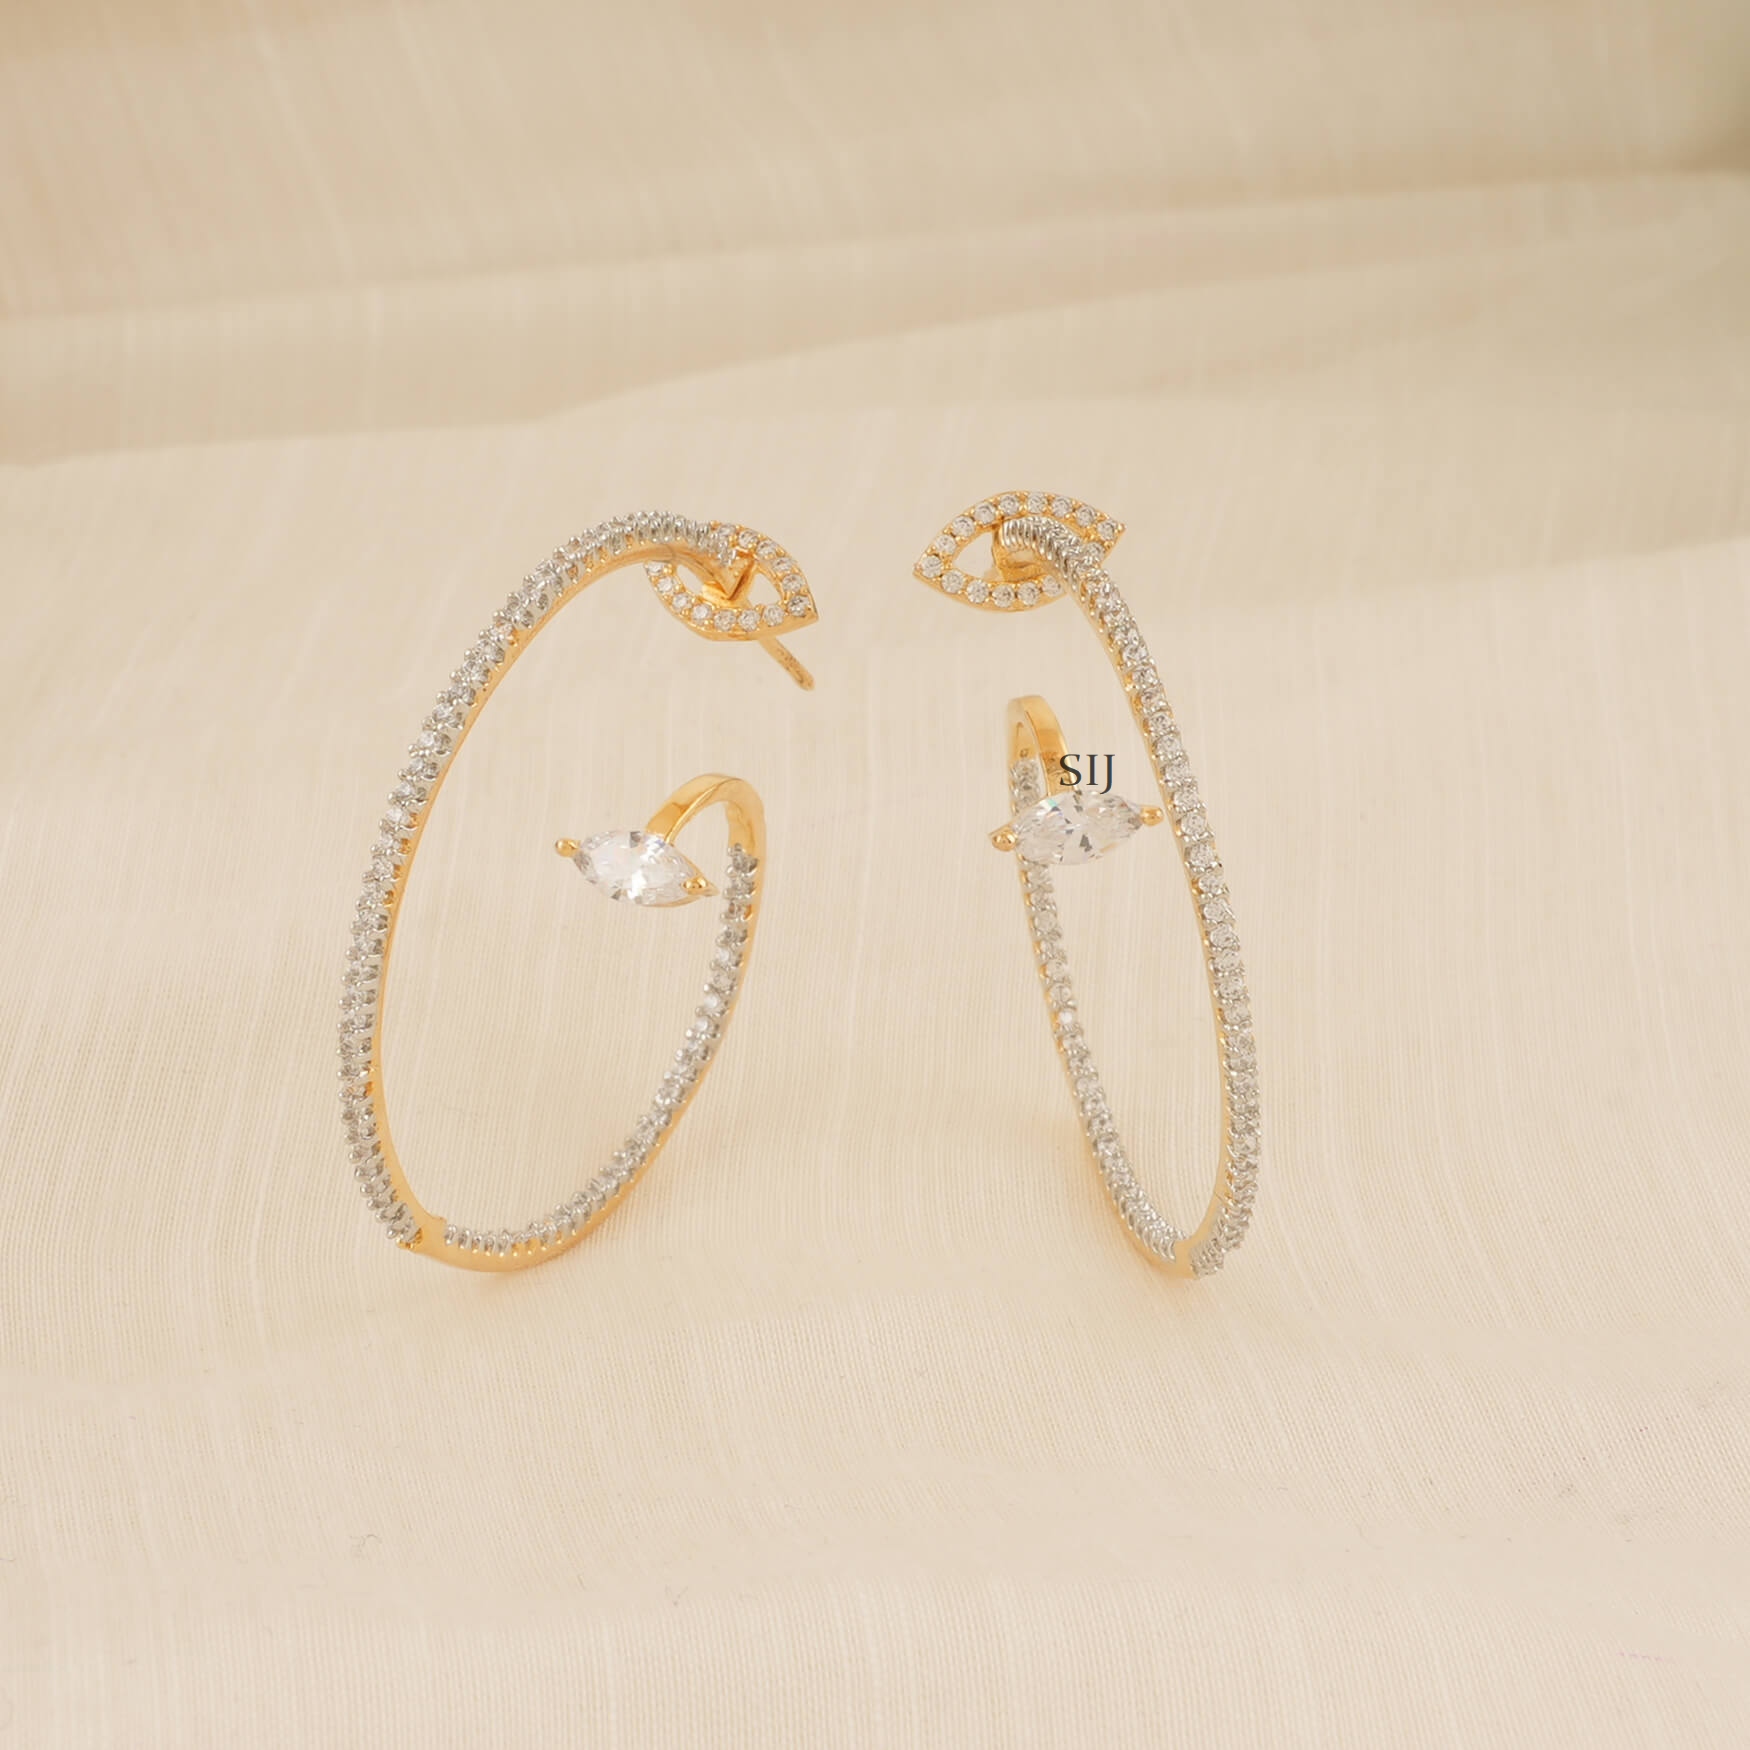 Gold Plated Round Hoop CZ Stones Earrings